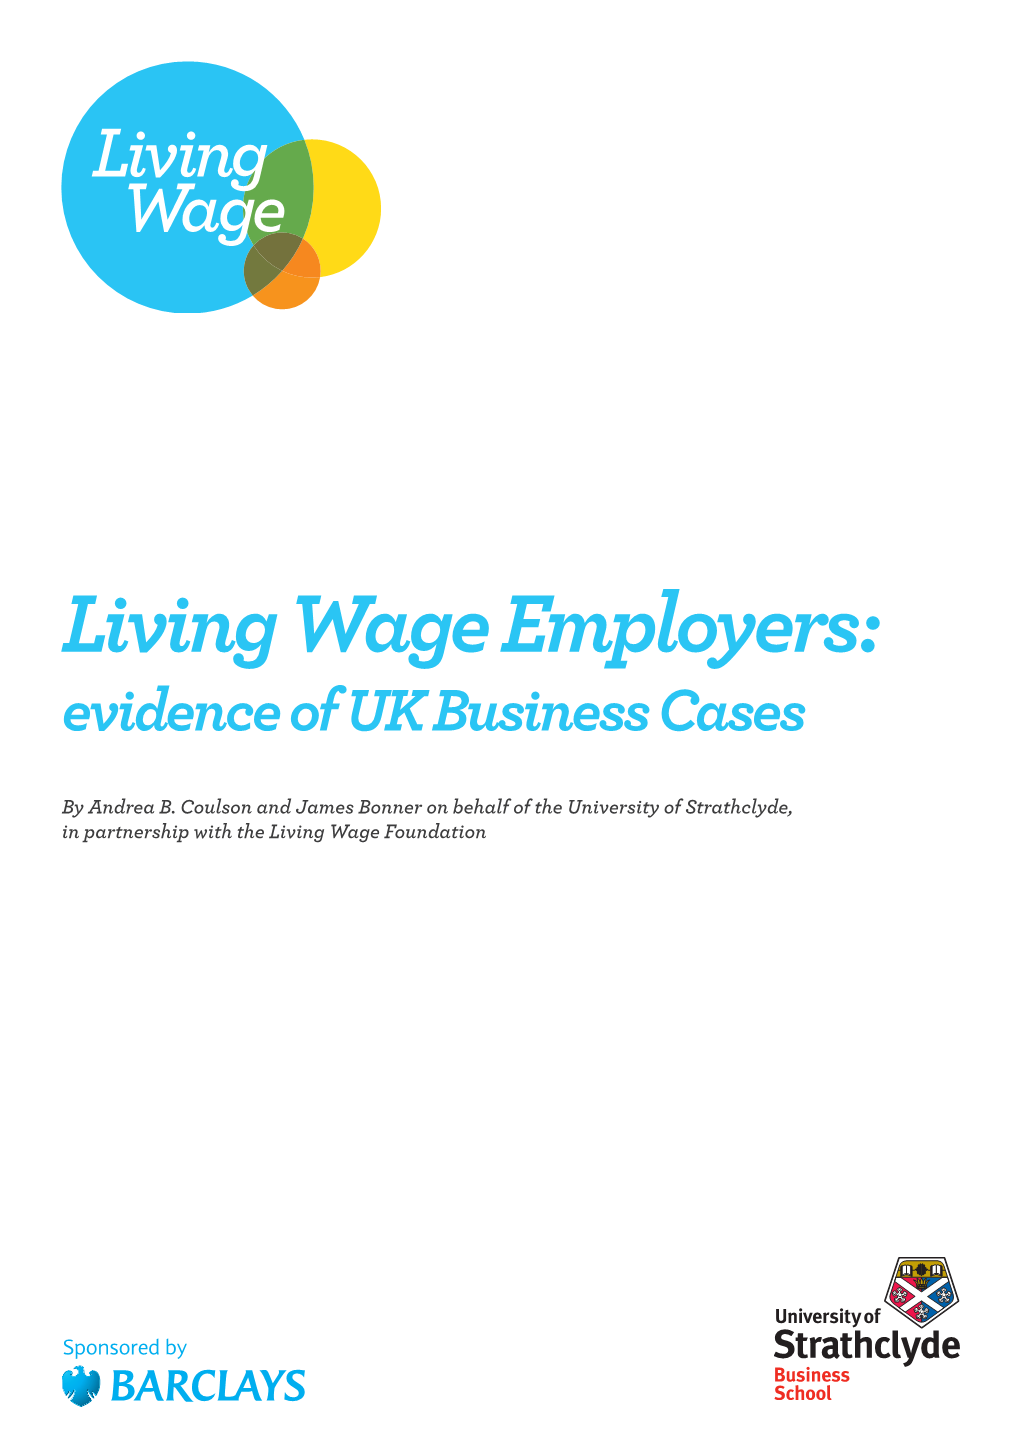 Evidence of UK Business Cases